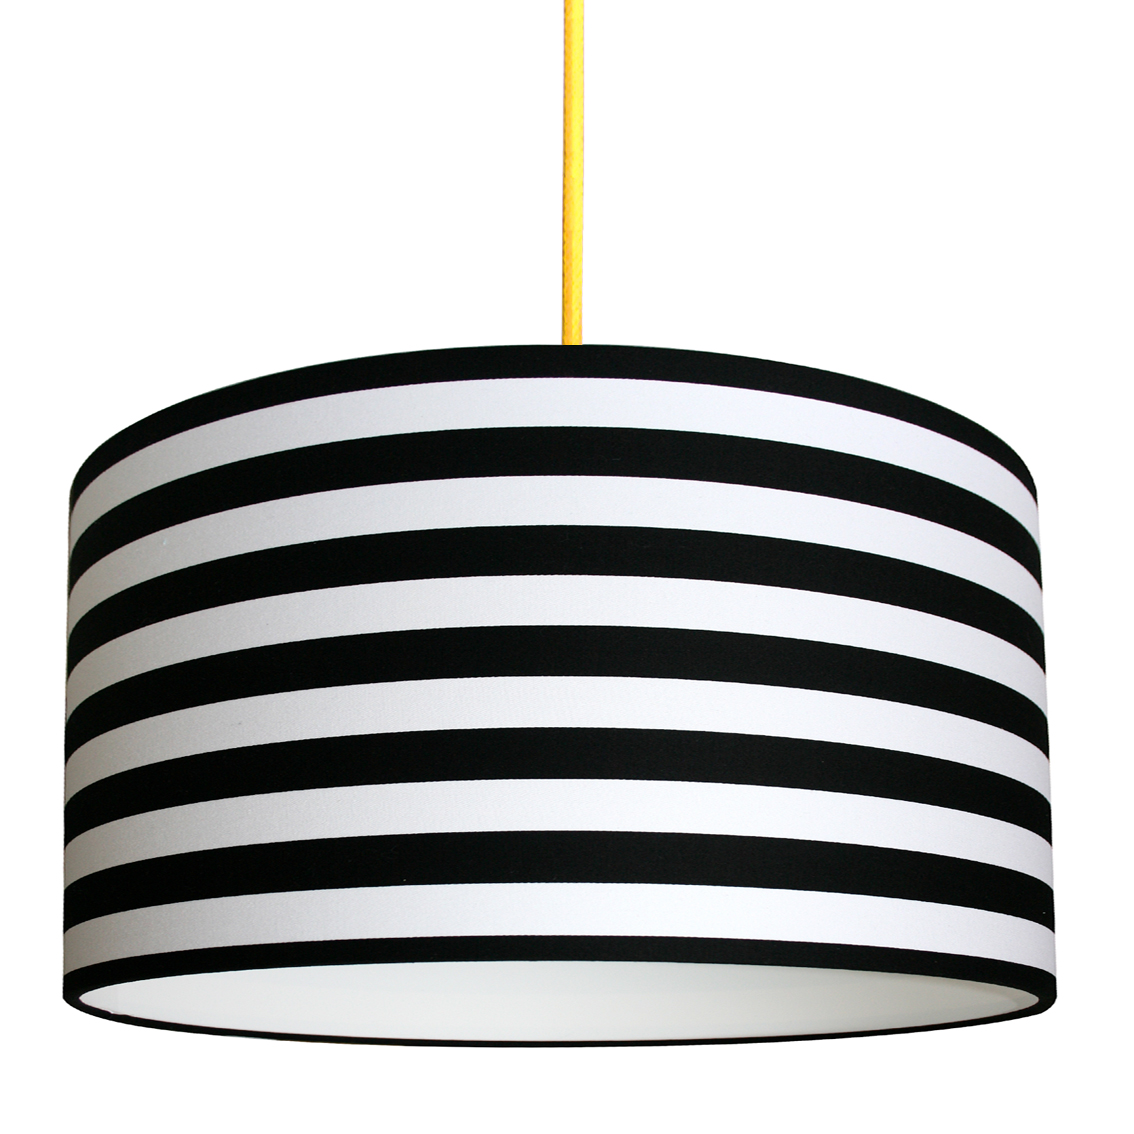 BLUE & WHITE STRIPED DRUM LAMPSHADE 